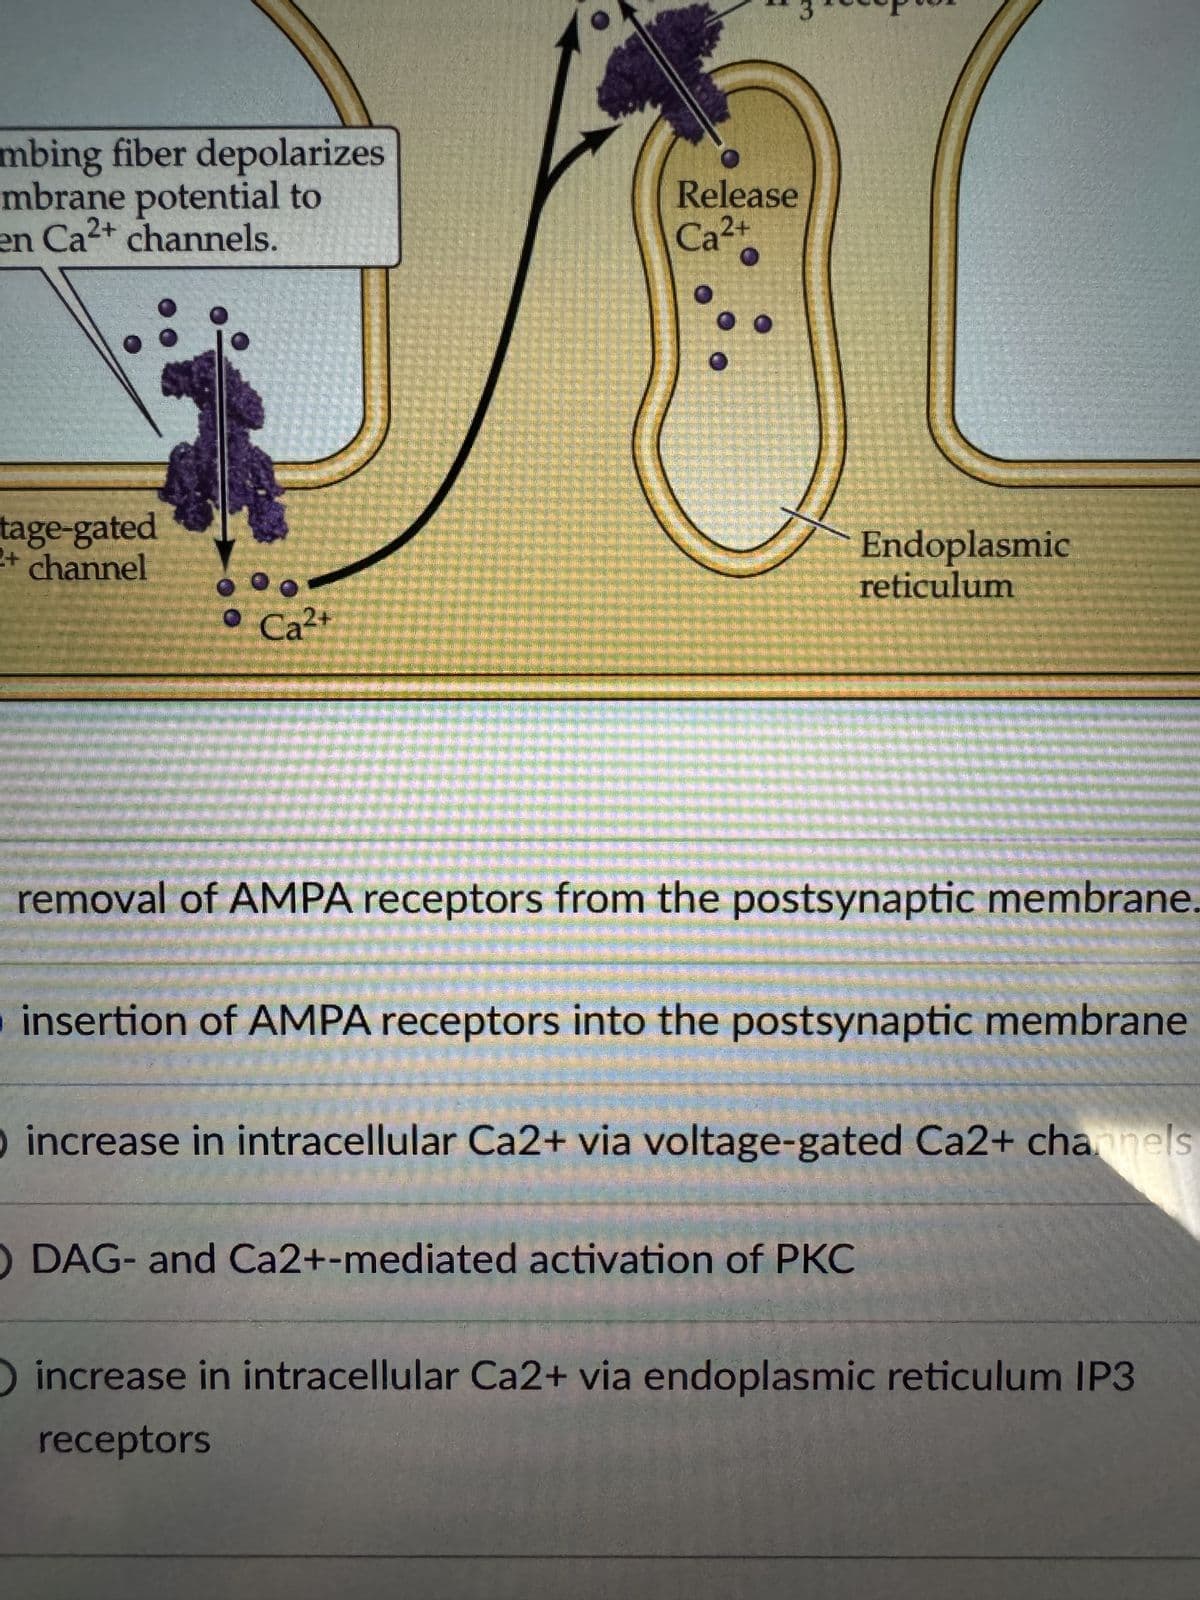 mbing fiber depolarizes
mbrane potential to
en Ca2+ channels.
tage-gated
channel
2+
Ca²+
Release
2+
Ca²+
Endoplasmic
reticulum
removal of AMPA receptors from the postsynaptic membrane.
insertion of AMPA receptors into the postsynaptic membrane
O increase in intracellular Ca2+ via voltage-gated Ca2+ channels
O DAG- and Ca2+-mediated activation of PKC
increase in intracellular Ca2+ via endoplasmic reticulum IP3
receptors